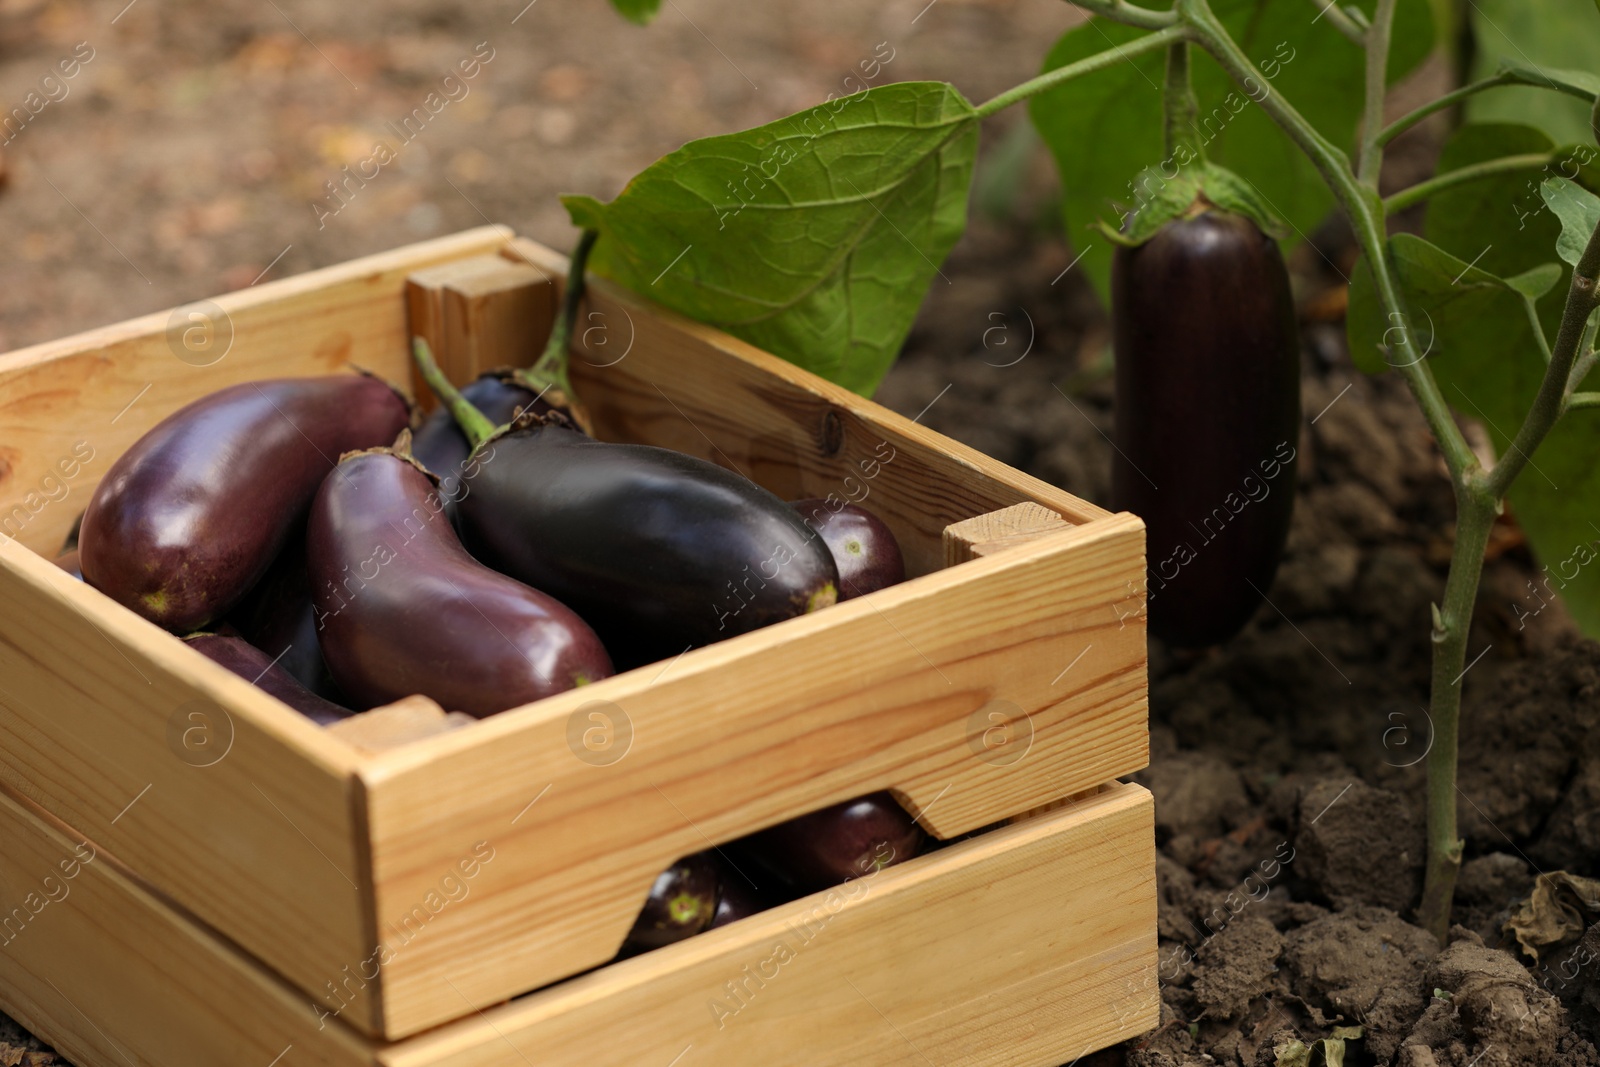 Photo of Ripe eggplants in wooden crate outdoors, closeup